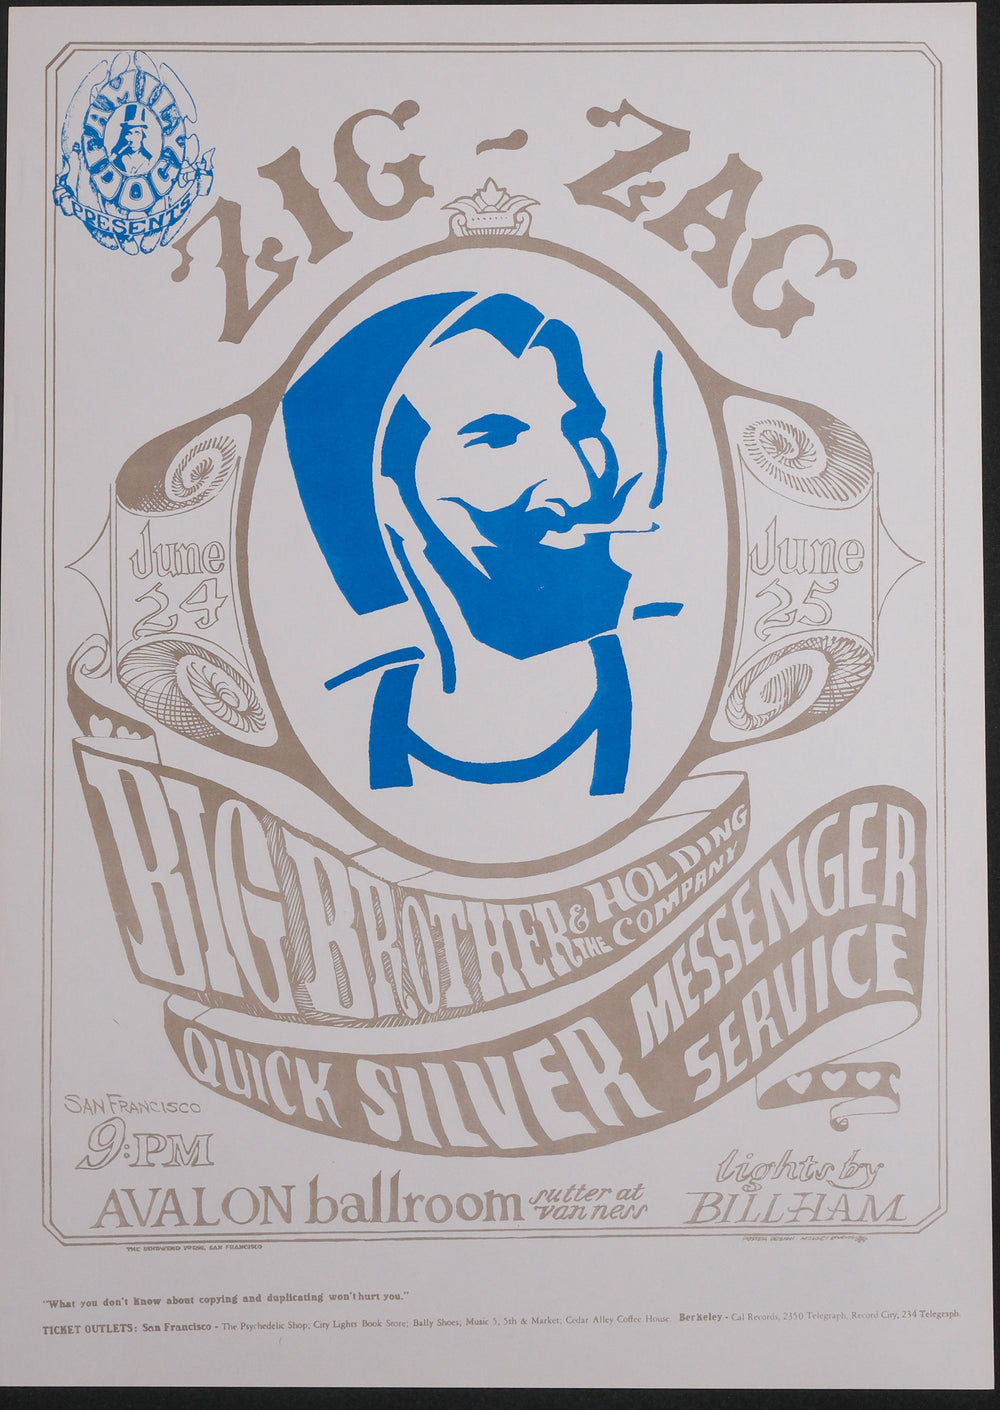 StanleyMouseandAltonKelleyQuicksilver1966SanFranciscoConcertPoster with blue man and white background 